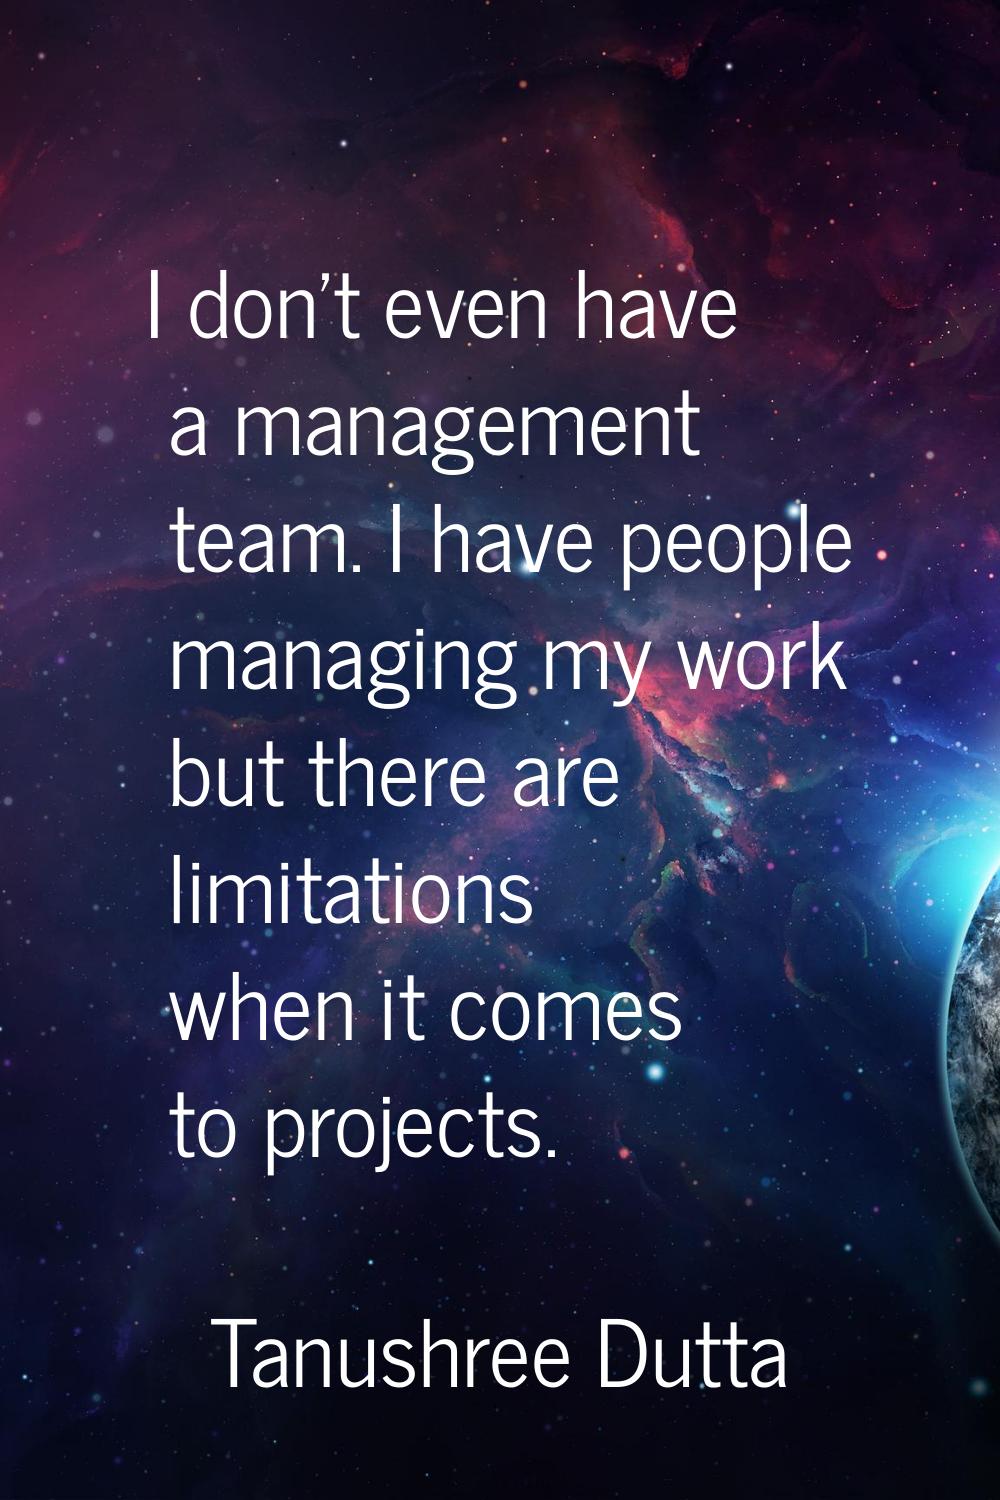 I don't even have a management team. I have people managing my work but there are limitations when 